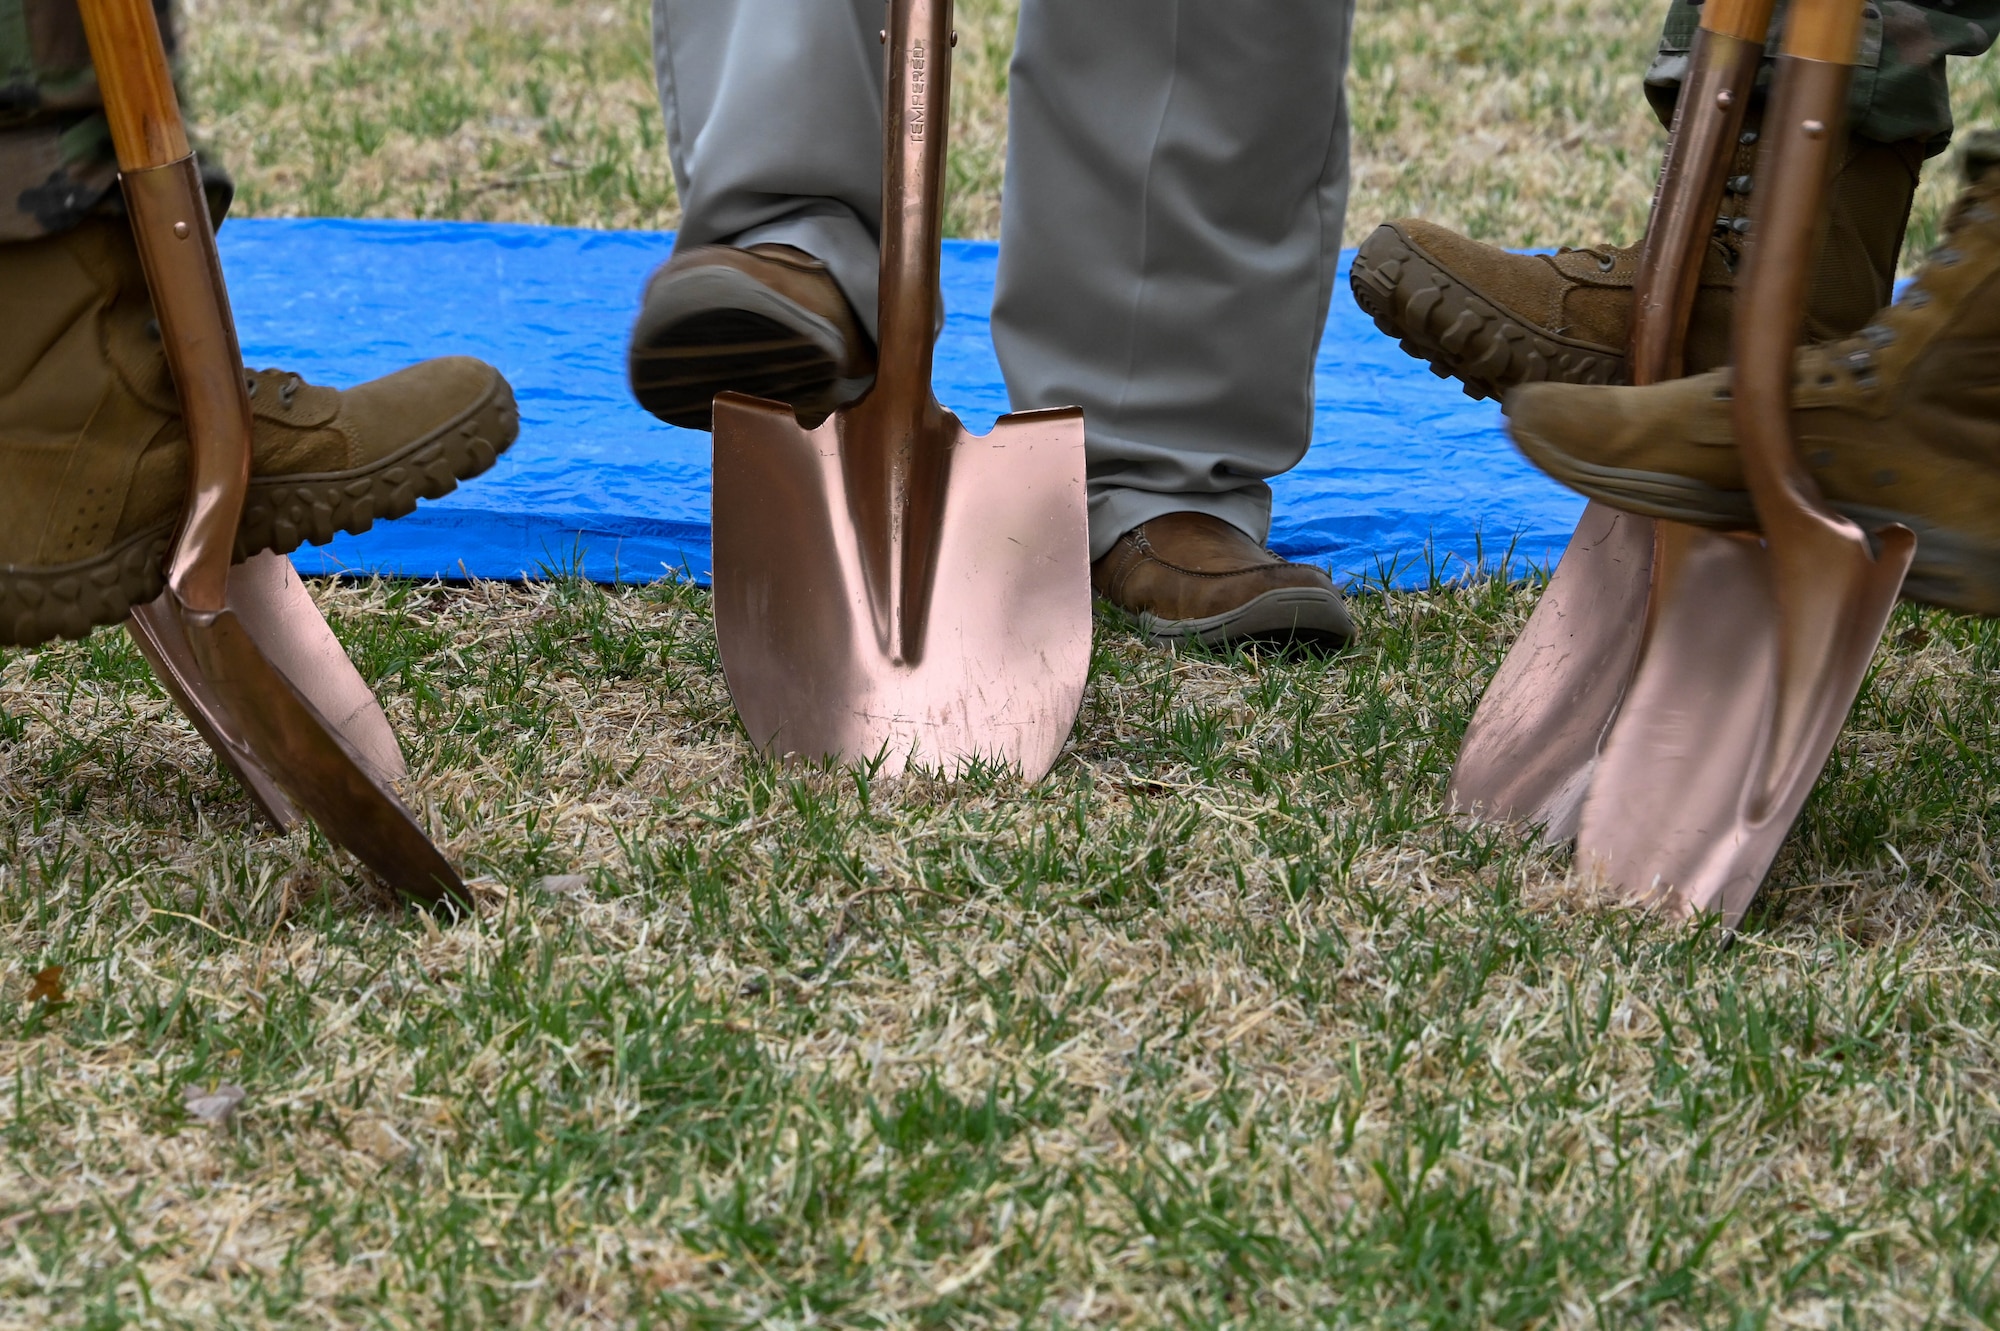 97th Air Mobility Wing Airmen and local community leaders break ground to plant a new eastern redbud tree at Altus Air Force Base, Oklahoma, May 2, 2022. The tree’s flowers are light to dark magenta pink in color, appearing in clusters from spring to early summer. (U.S. Air Force photo by Senior Airman Kayla Christenson)